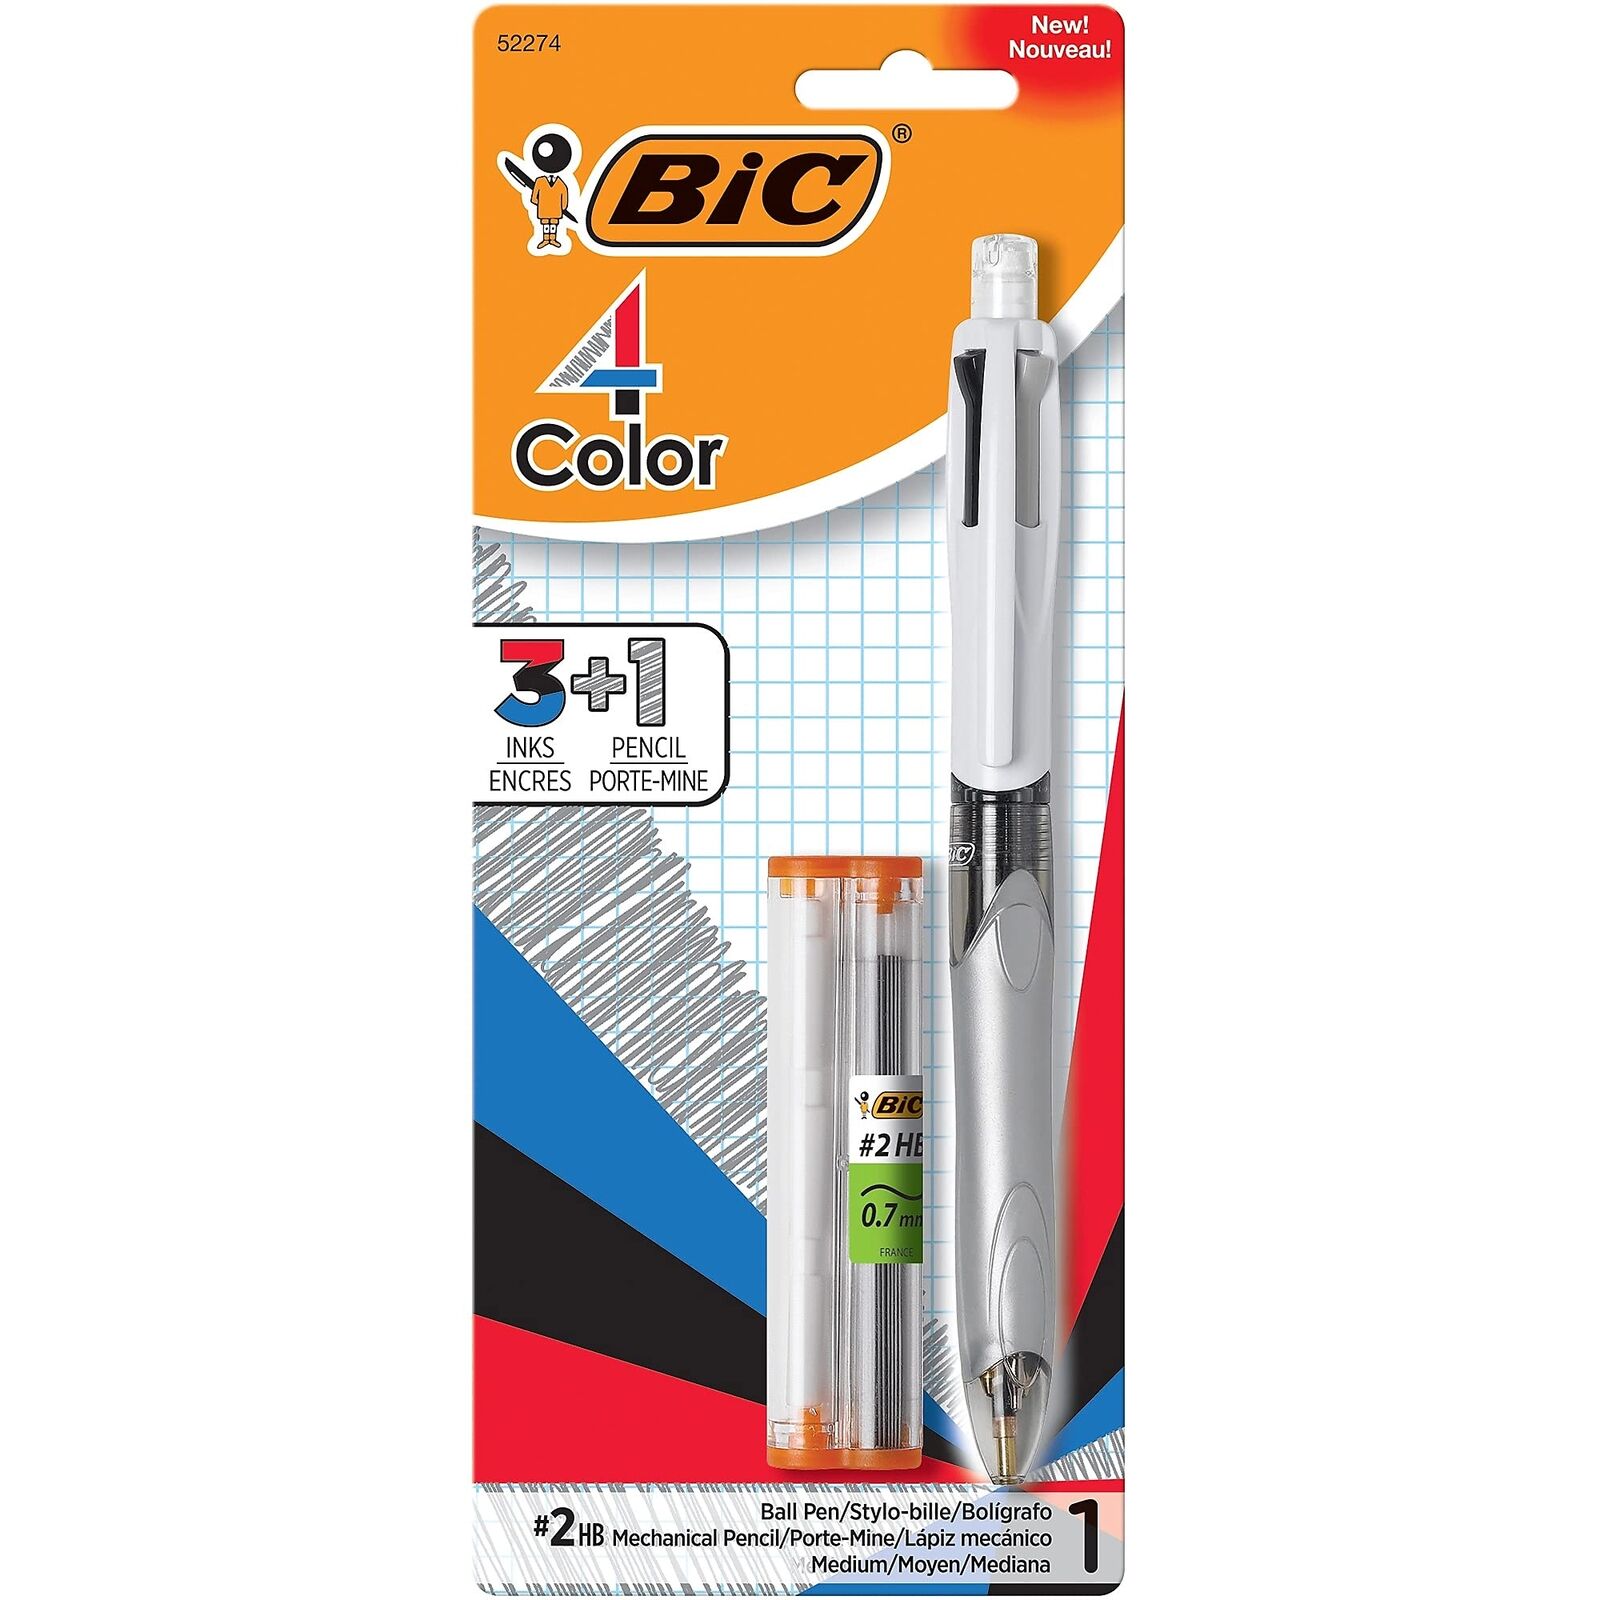 New Bic 4-Color 3+1 Medium Point Ball Pen/0.7Mm Lead 1-Pack Blister